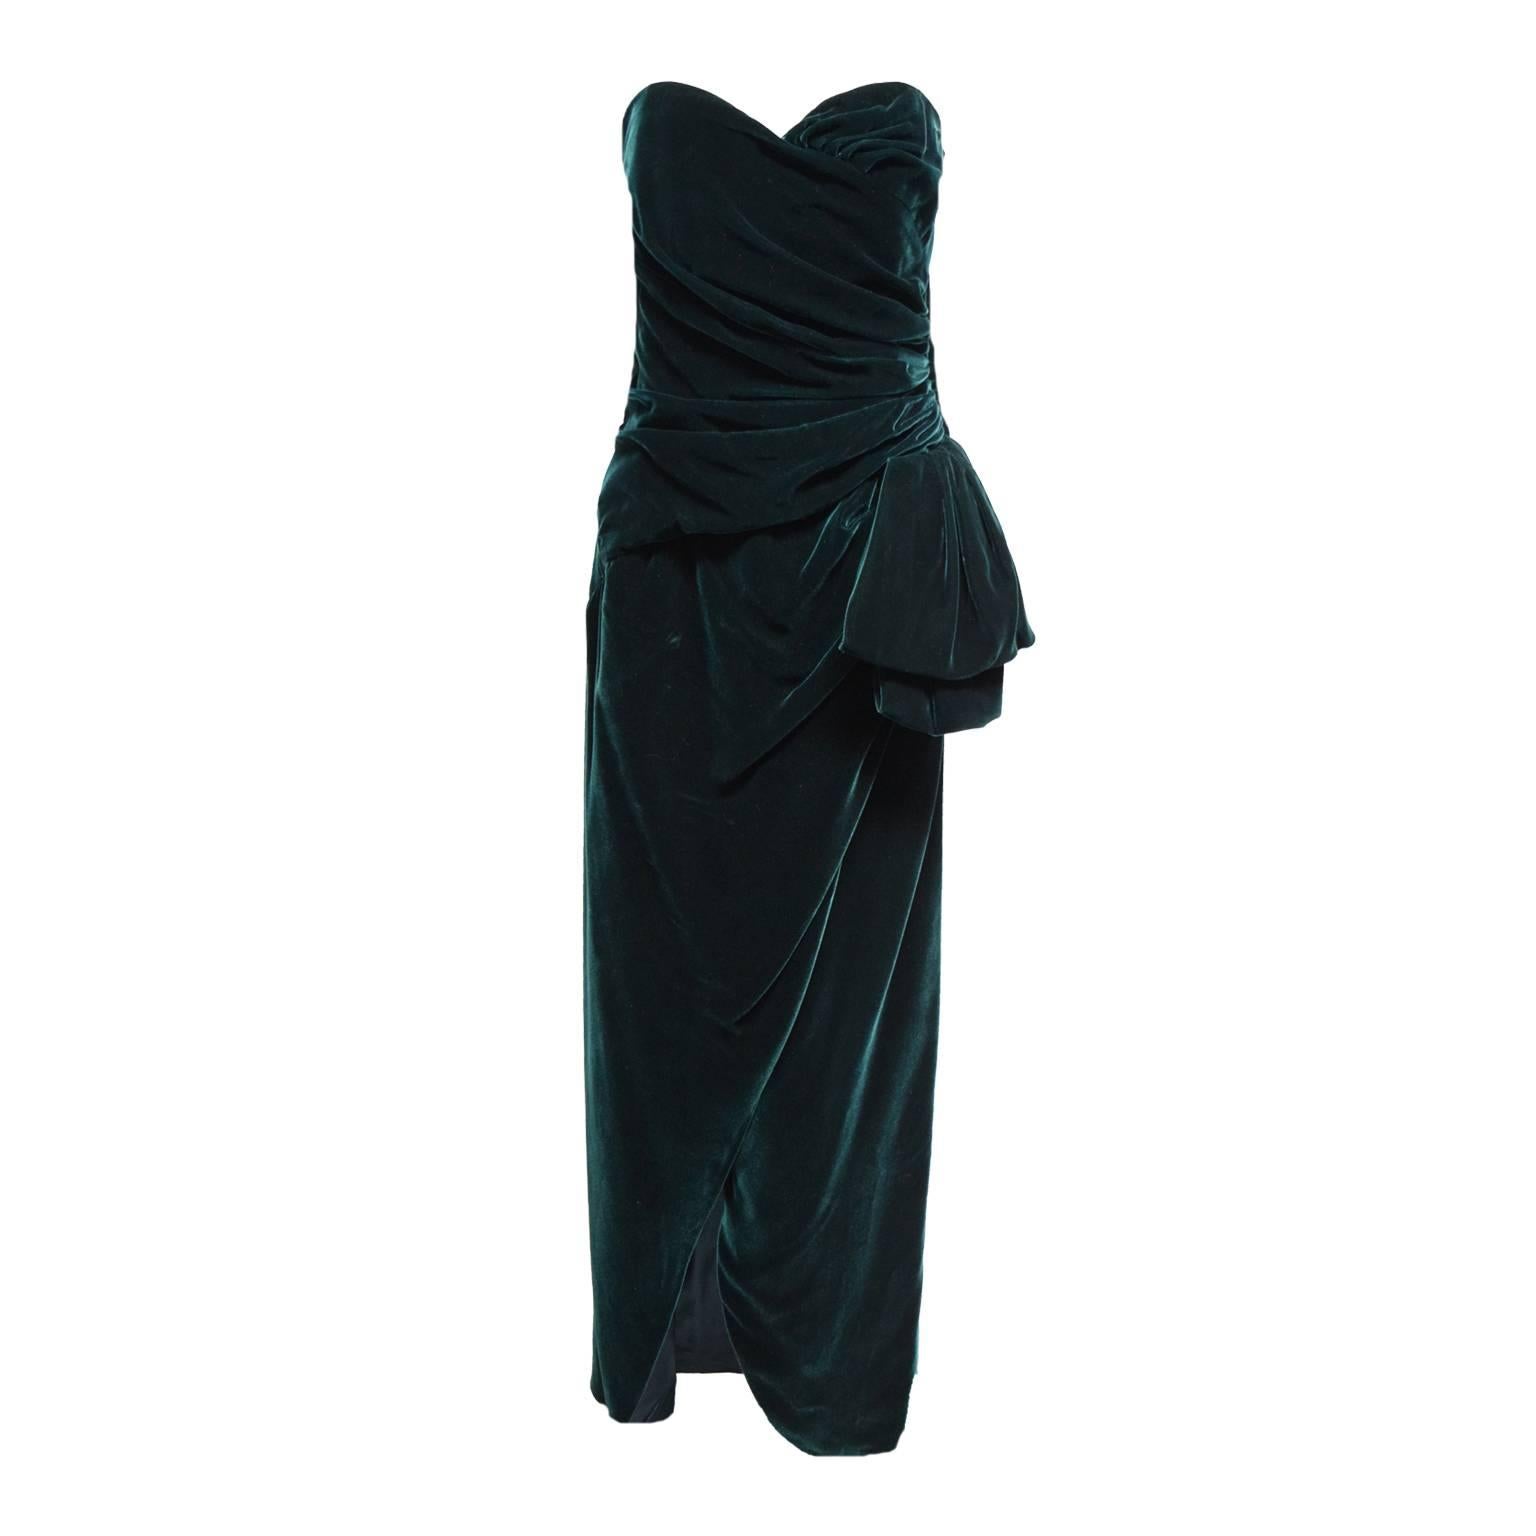 Victor Costa Emerald Green Velvet Sweetheart Dress with Side Sash For Sale